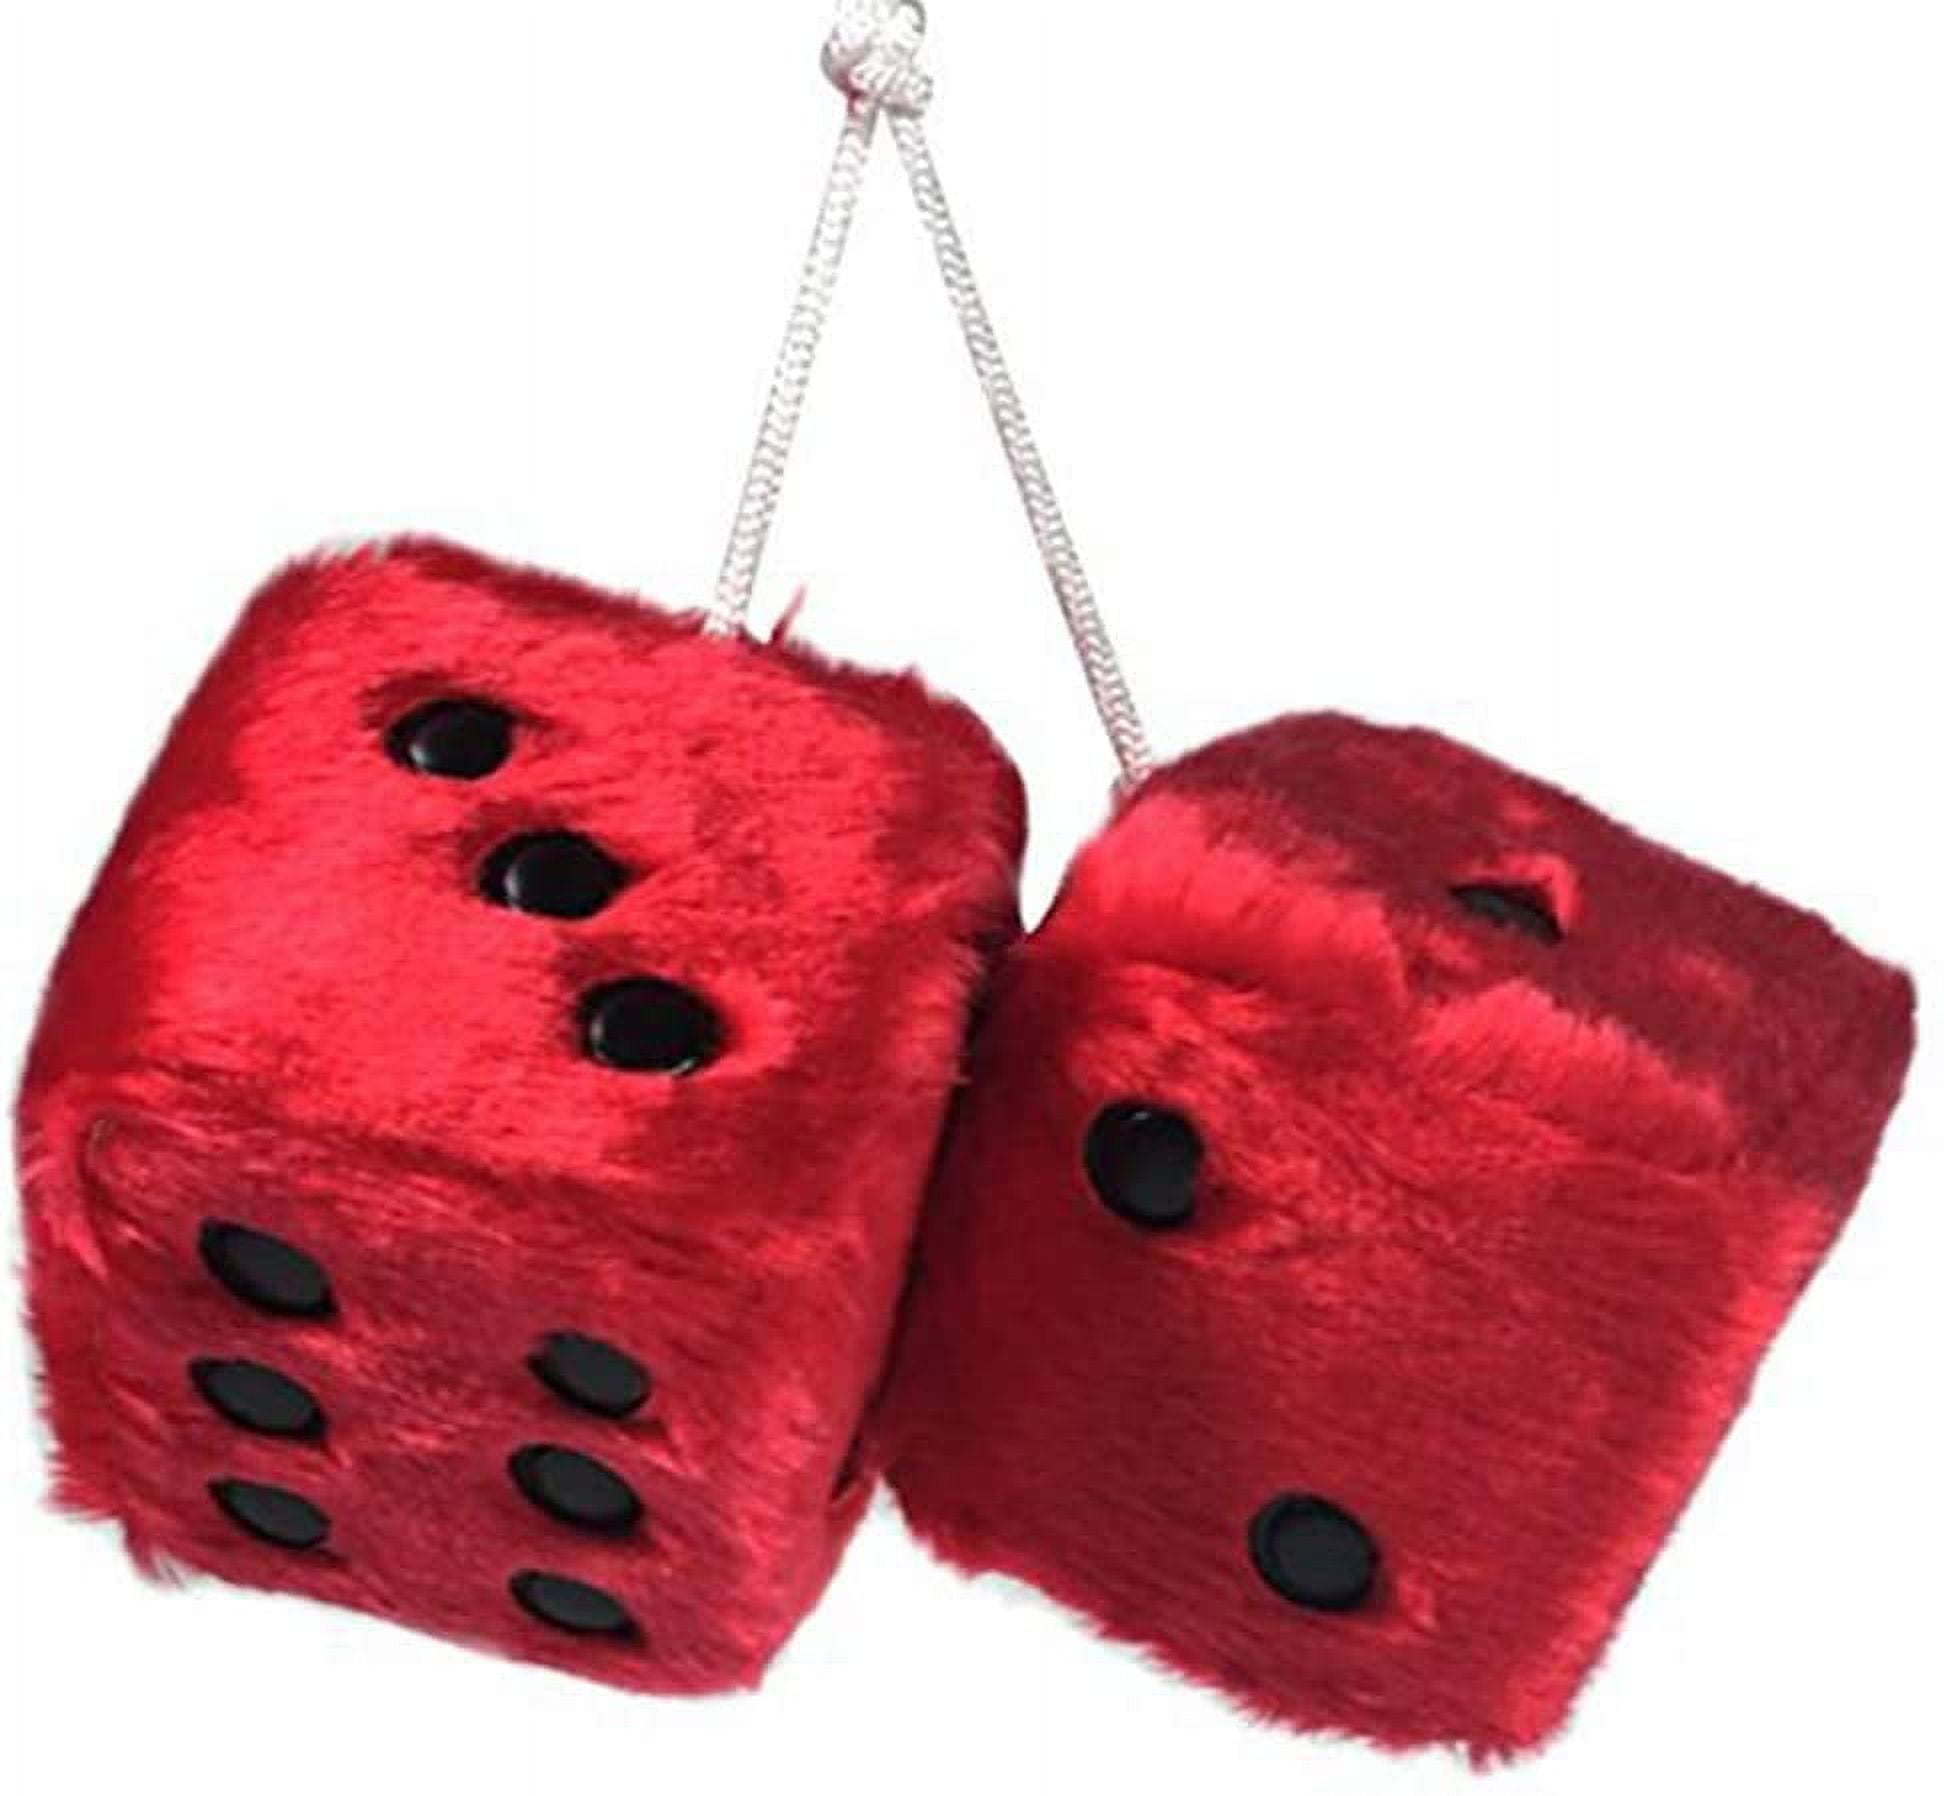 1 Pair of Retro Square Mirror Hanging Couple Fuzzy Plush Dice with Dots for Car  Interior Ornament Decoration (Red) 